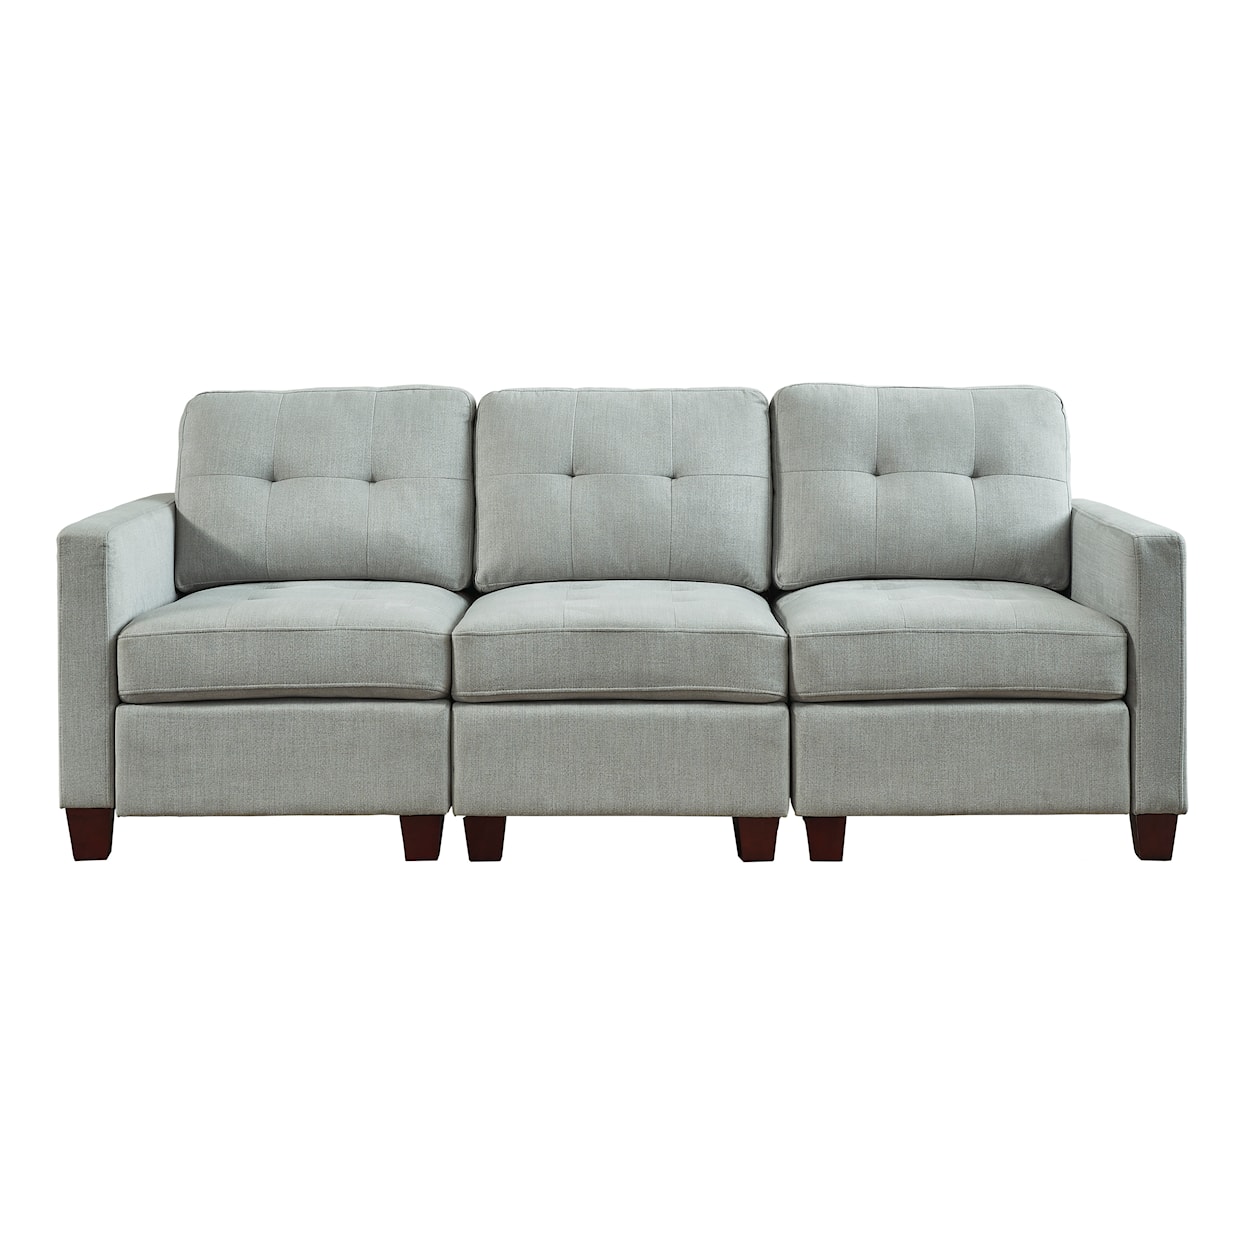 Signature Design by Ashley Edlie 3-Piece Sectional